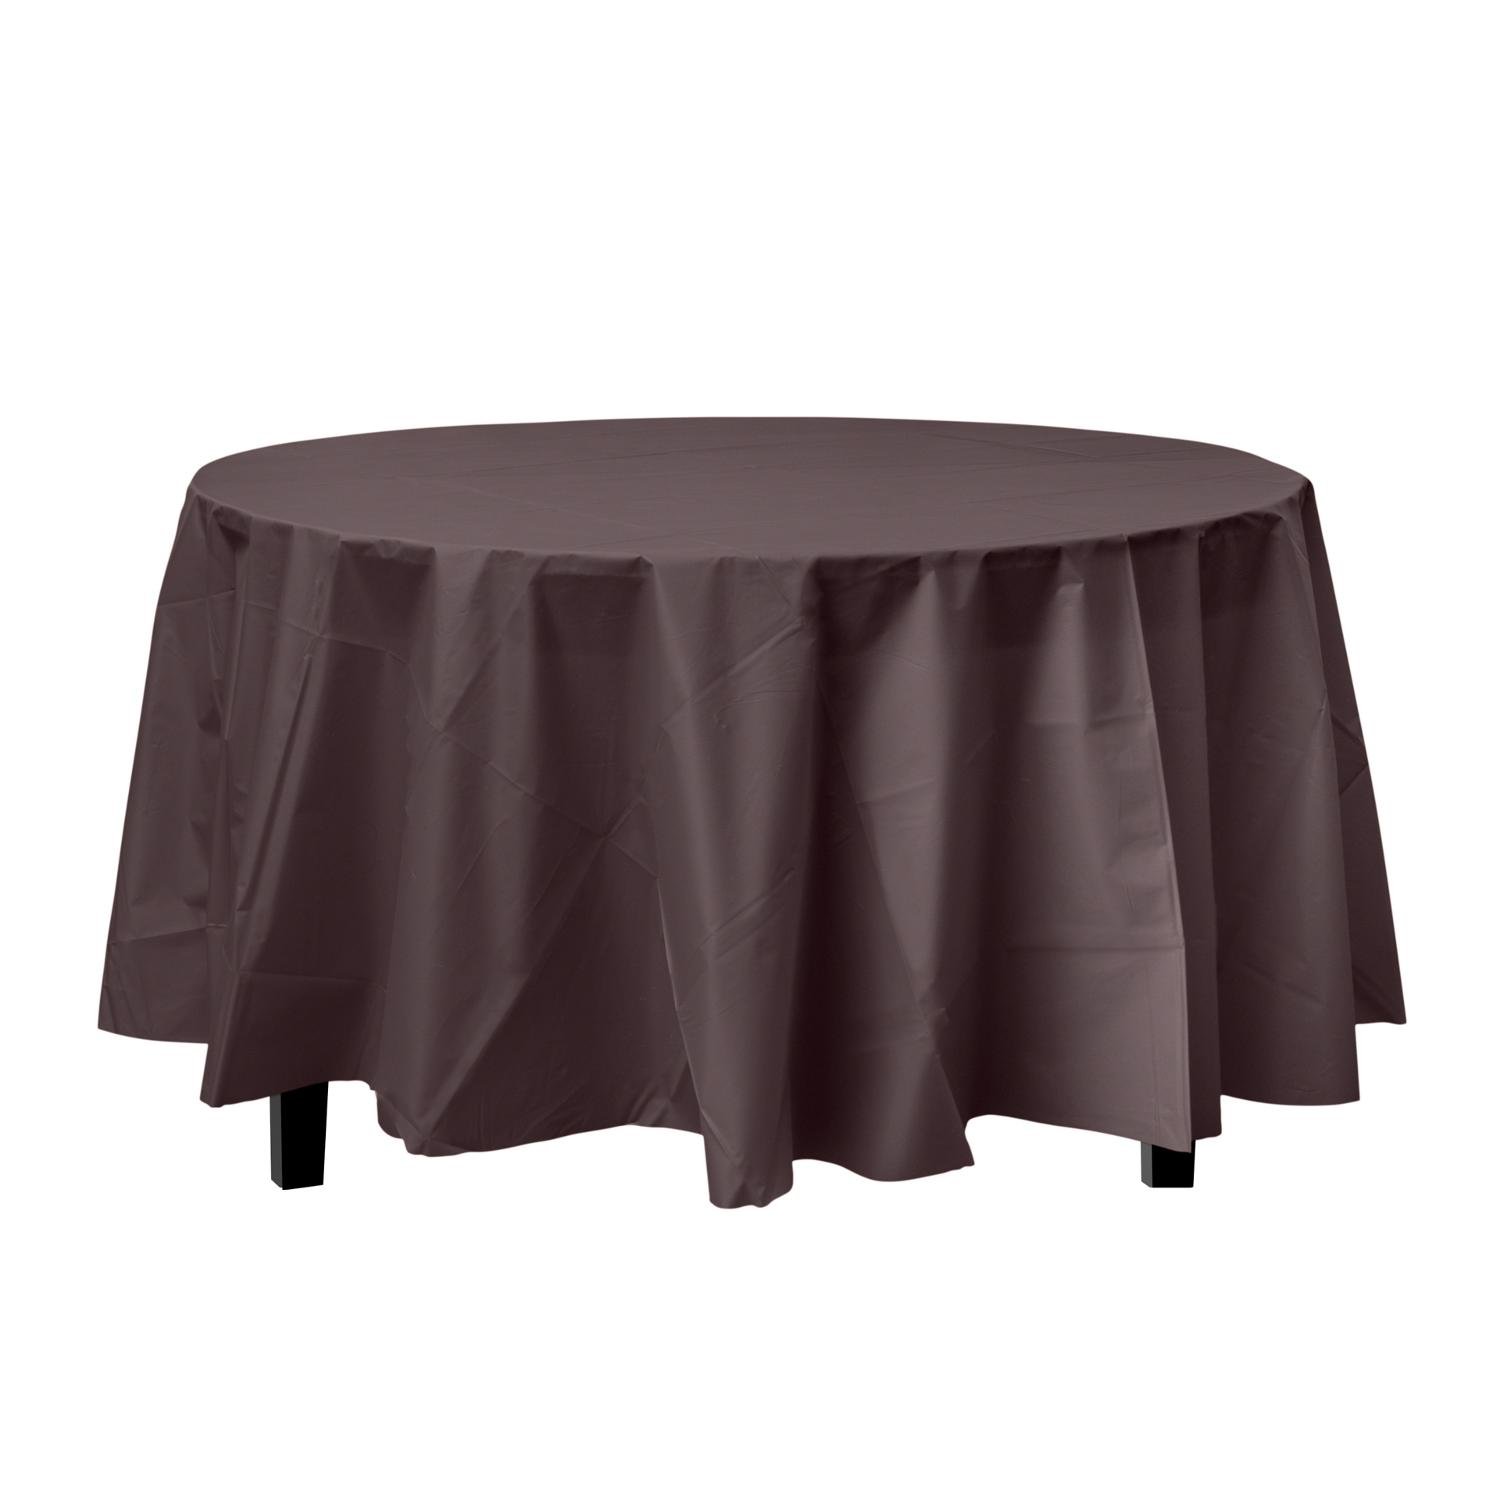 *Premium* Round Brown table cover (Case of 96)